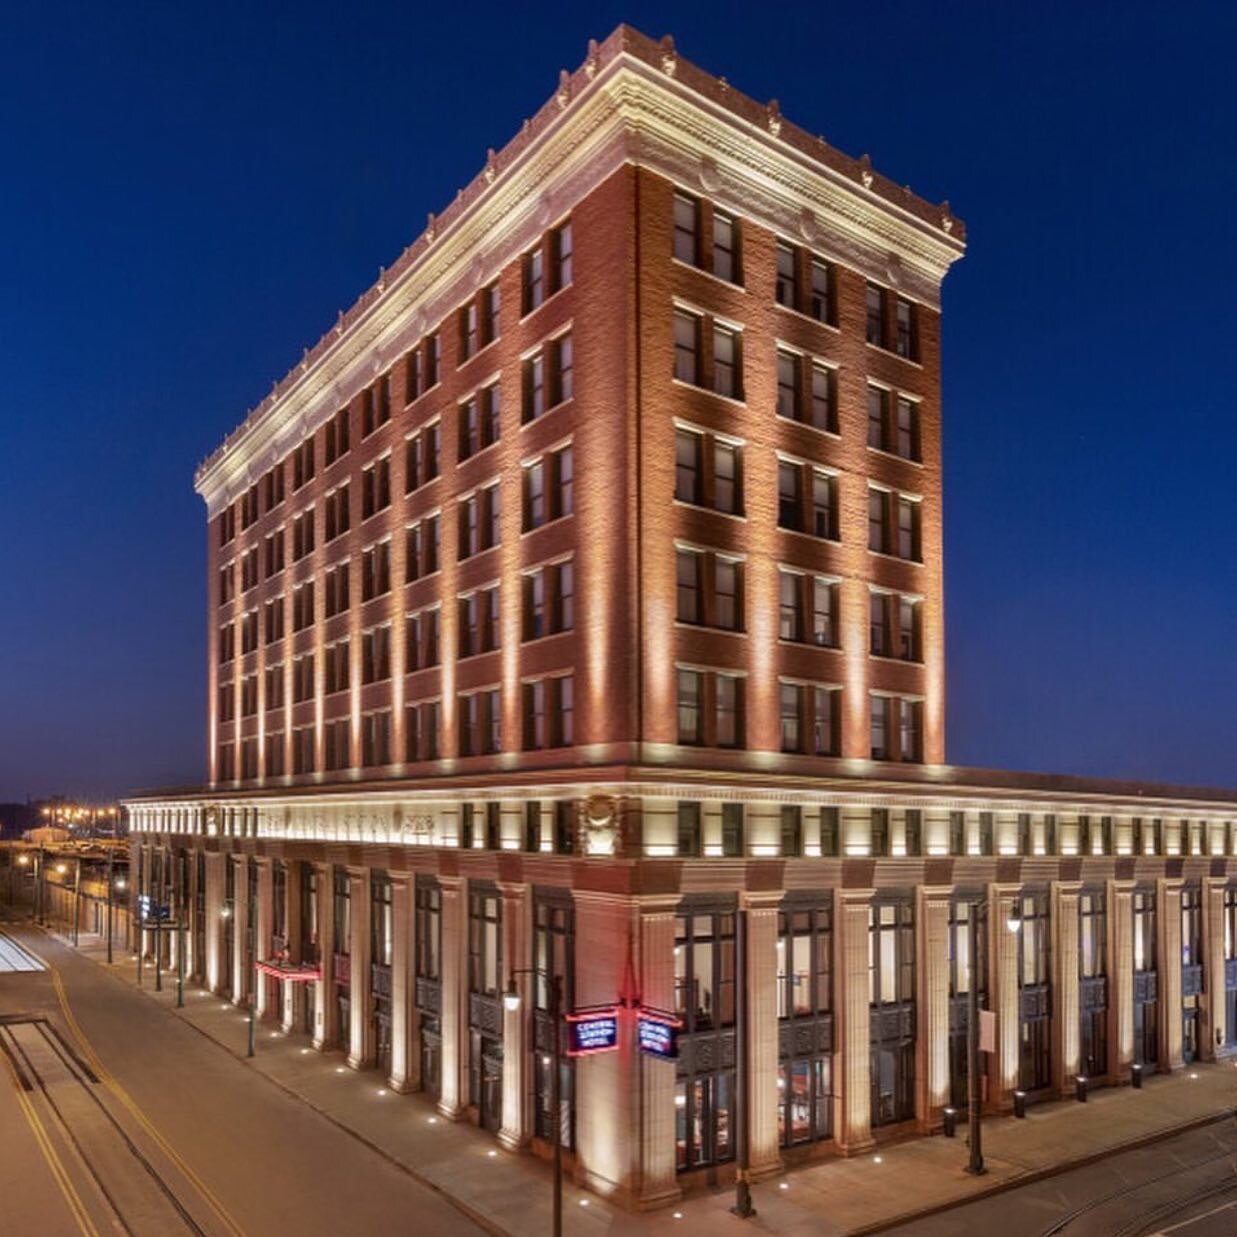 Central Station Hotel is the Winner of Best Large Renovation (&gt;$15M) &amp; Project of the Year!  Davis Patrikios Criswell is so thankful for being on this great project!  Thank you @mbjmemphis for the amazing honor!